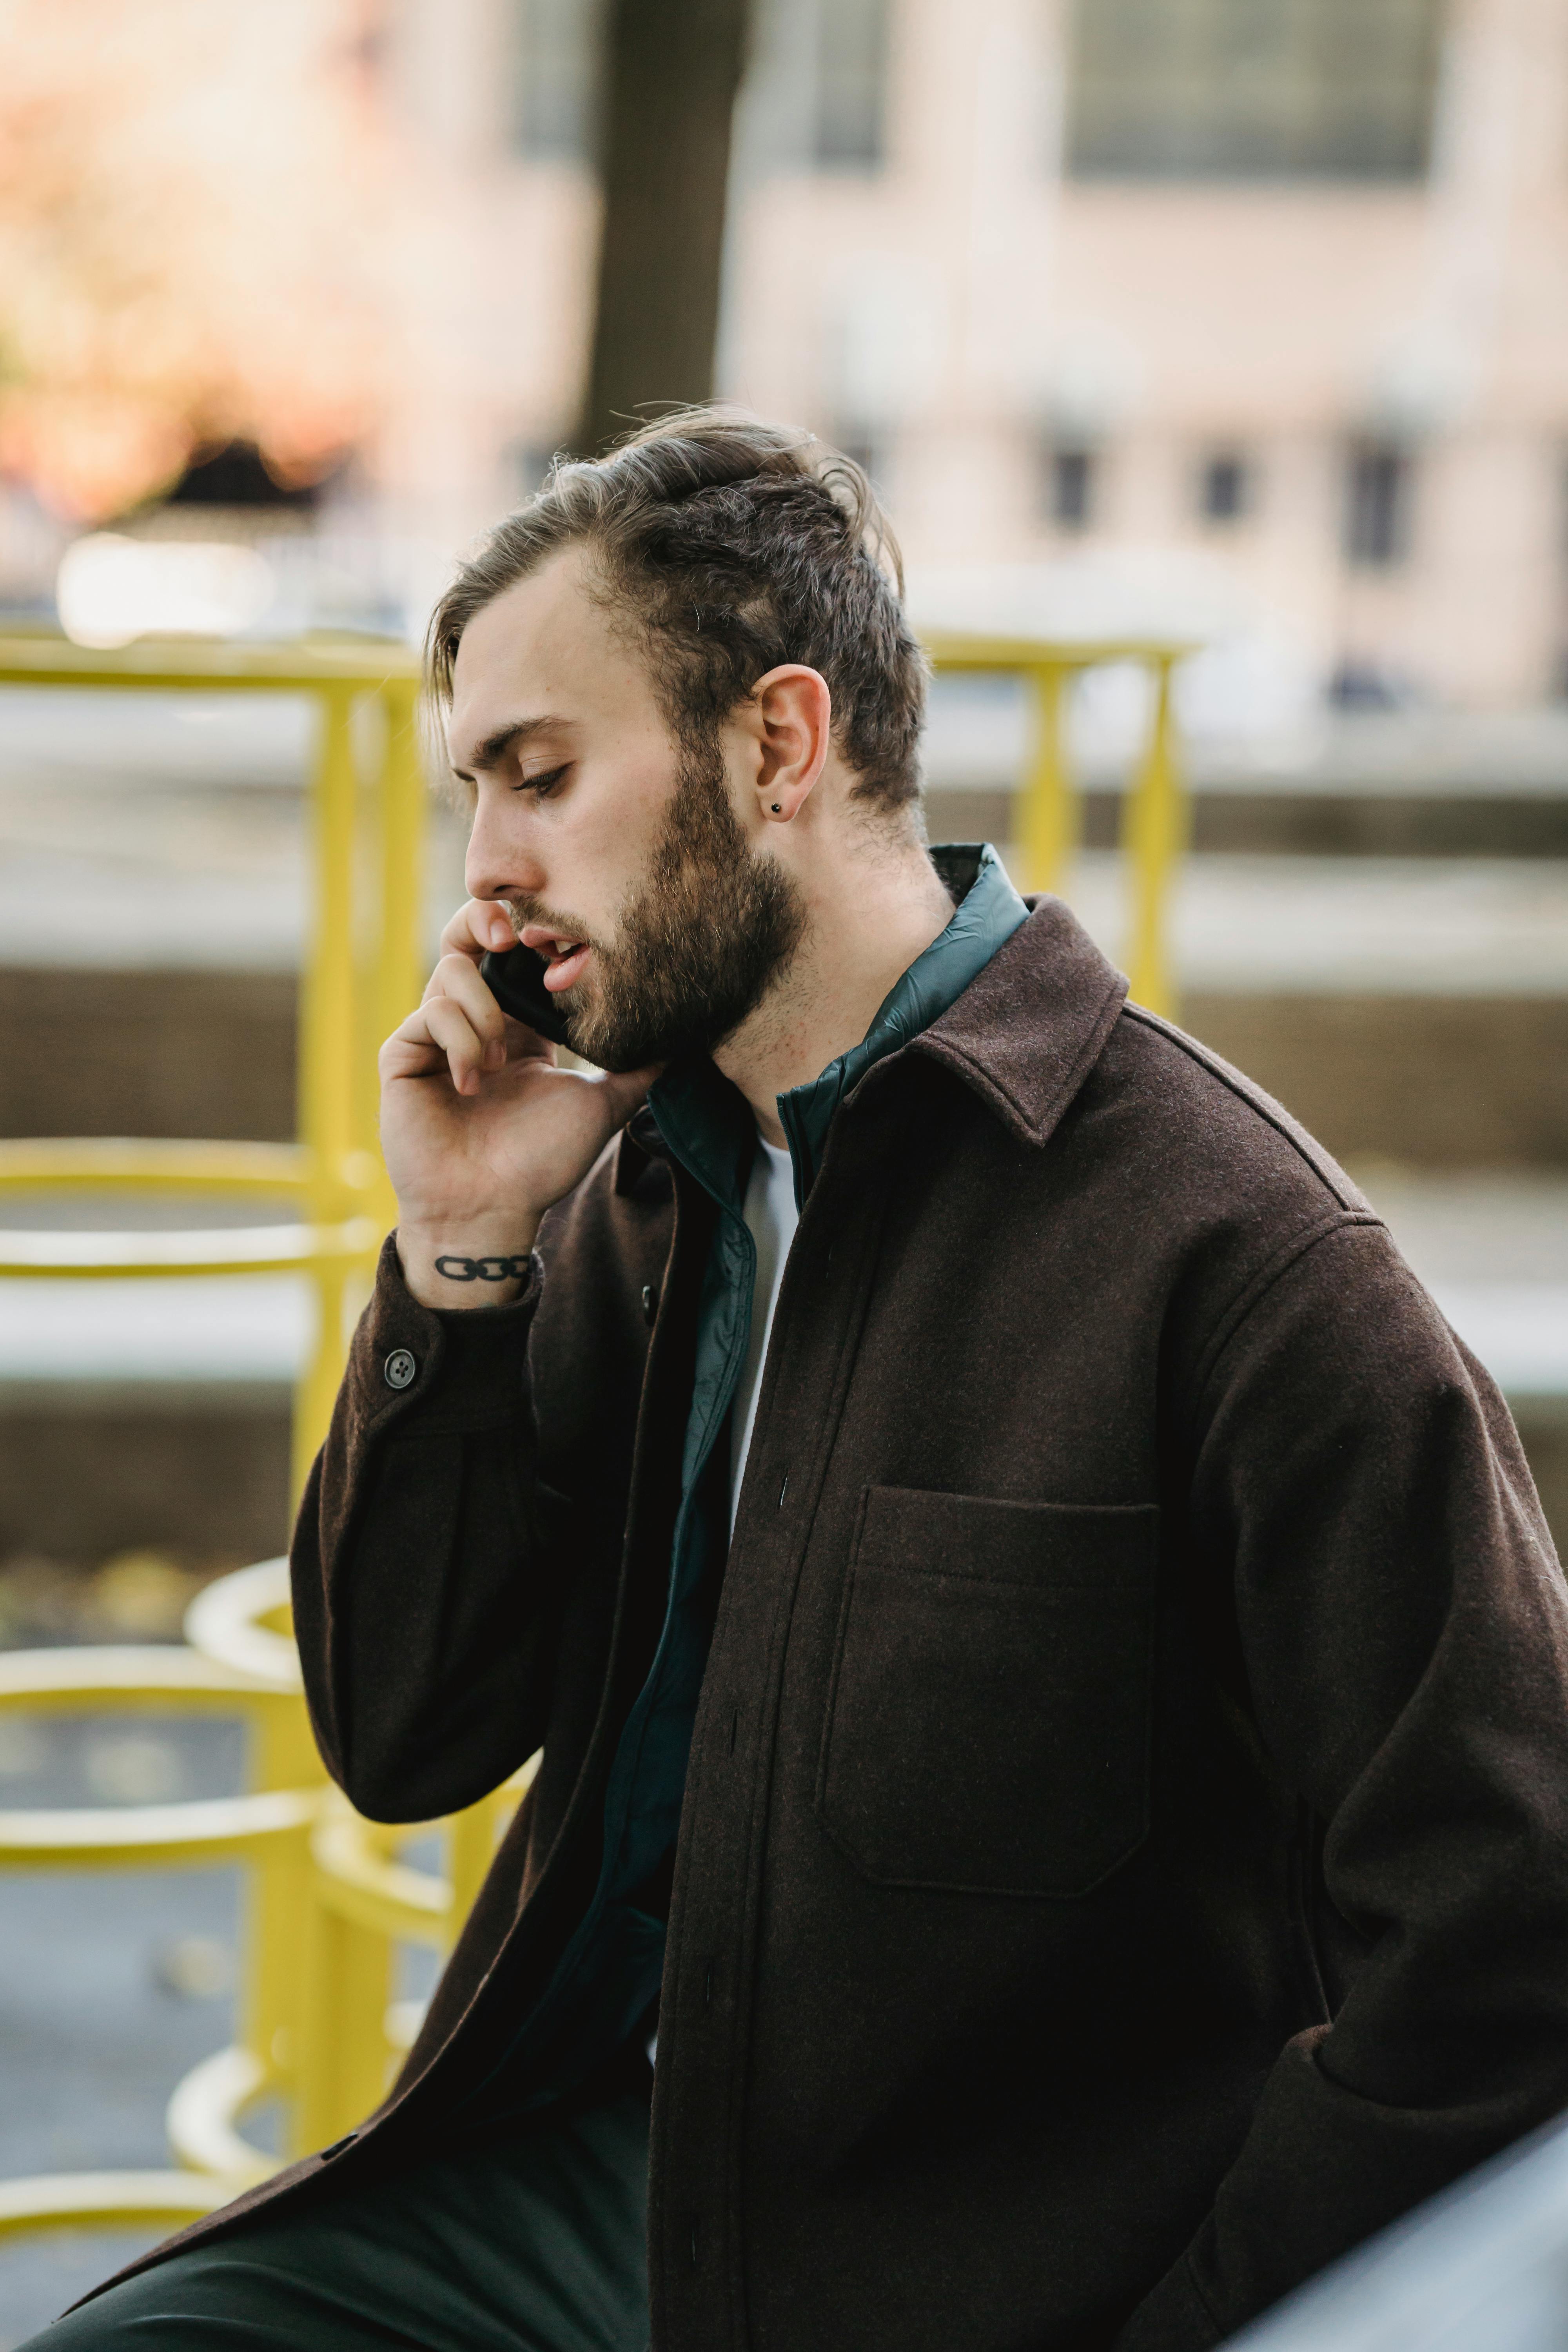 A pensive man talking on the phone while on the street | Source: Pexels